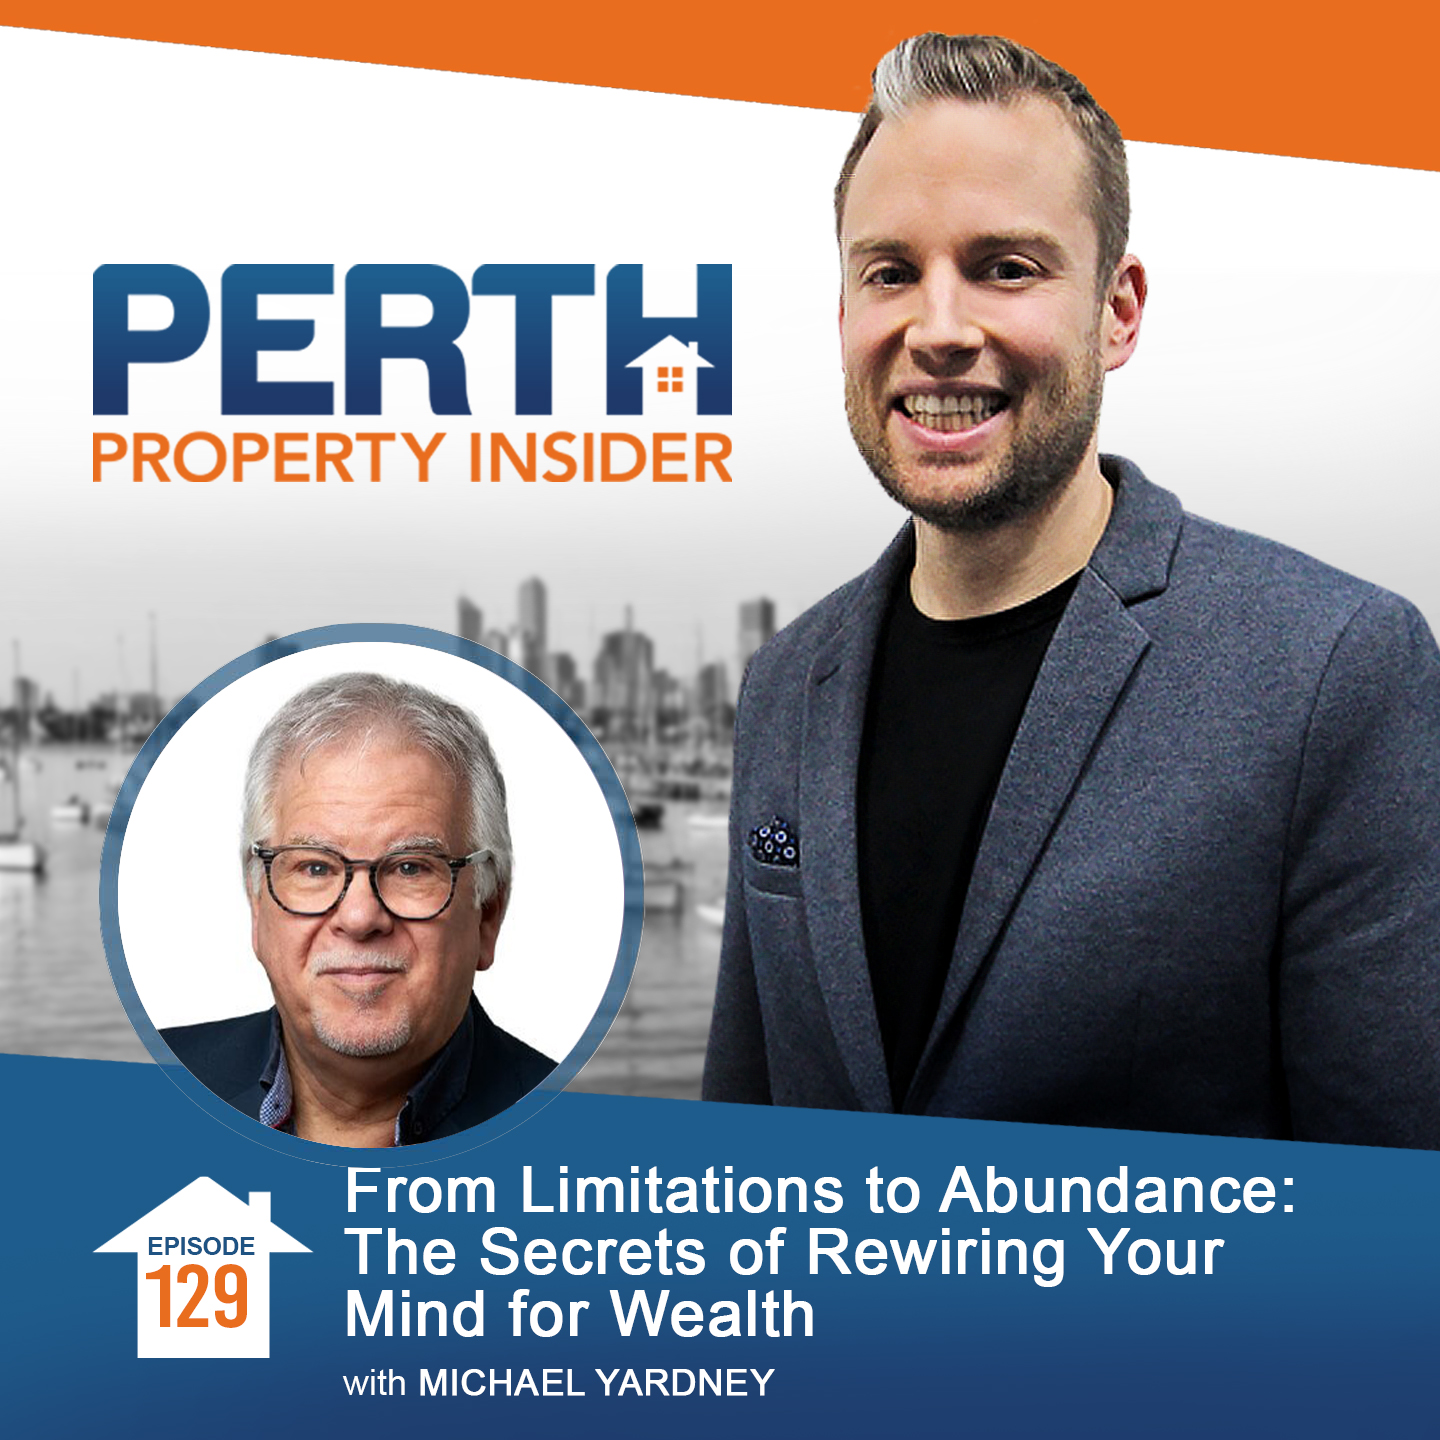 From Limitations to Abundance: The Secrets of Rewiring Your Mind for Wealth with Michael Yardney